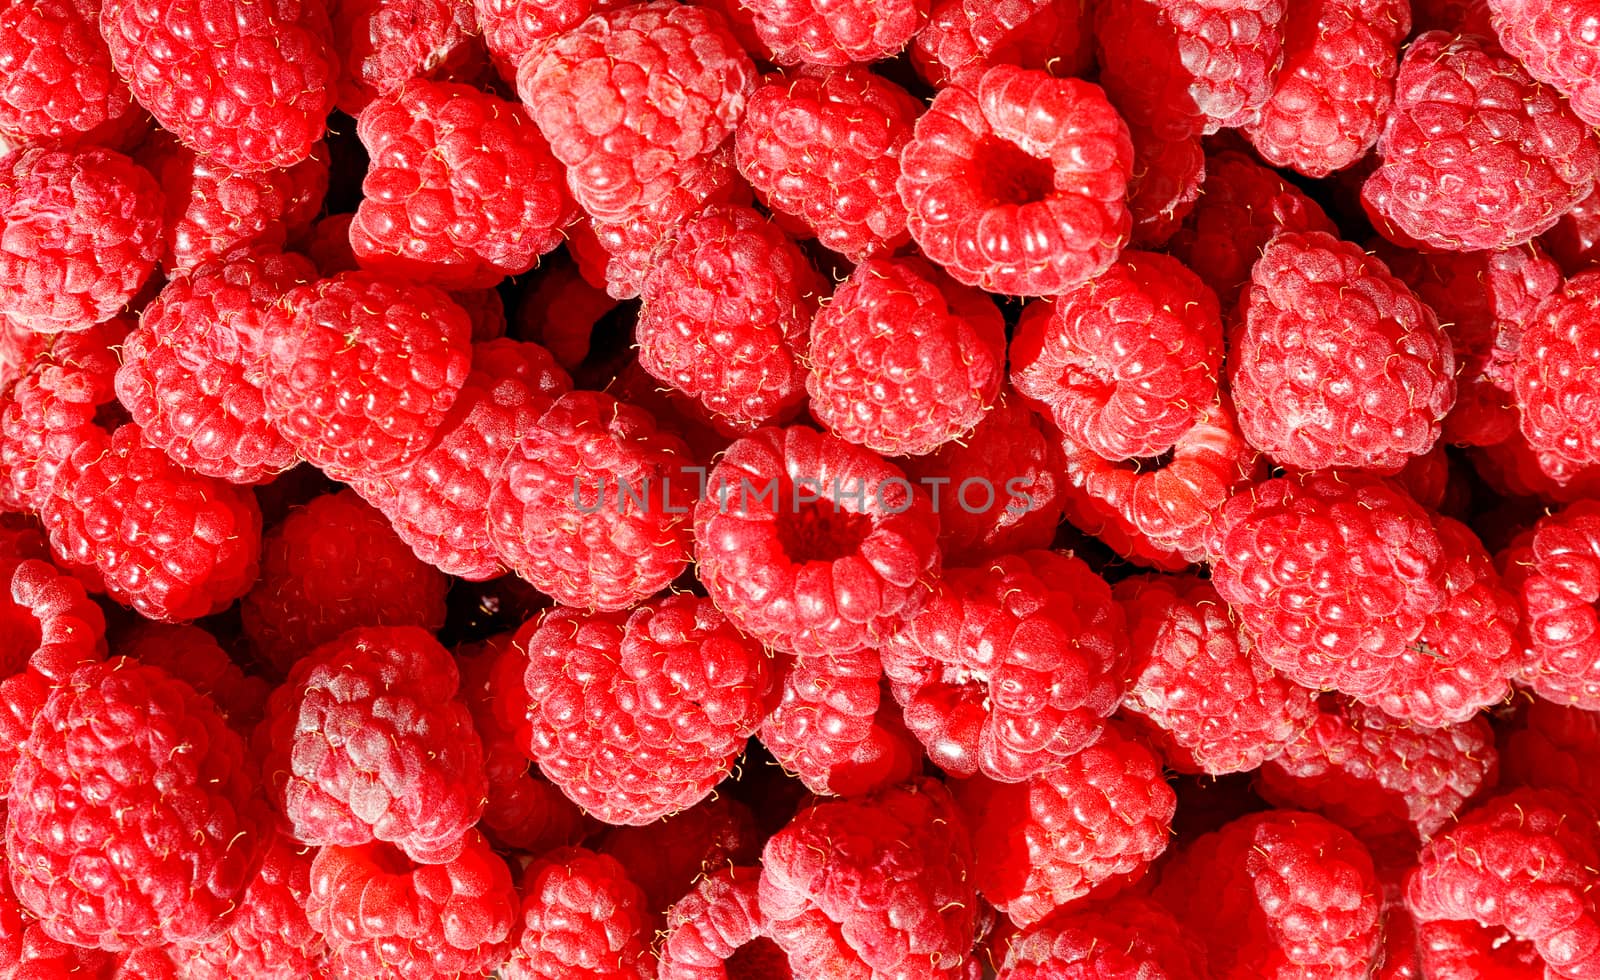 Red and ripe raspberries close-up in bulk in sunlight, for sale, background and texture, close-up, top view.